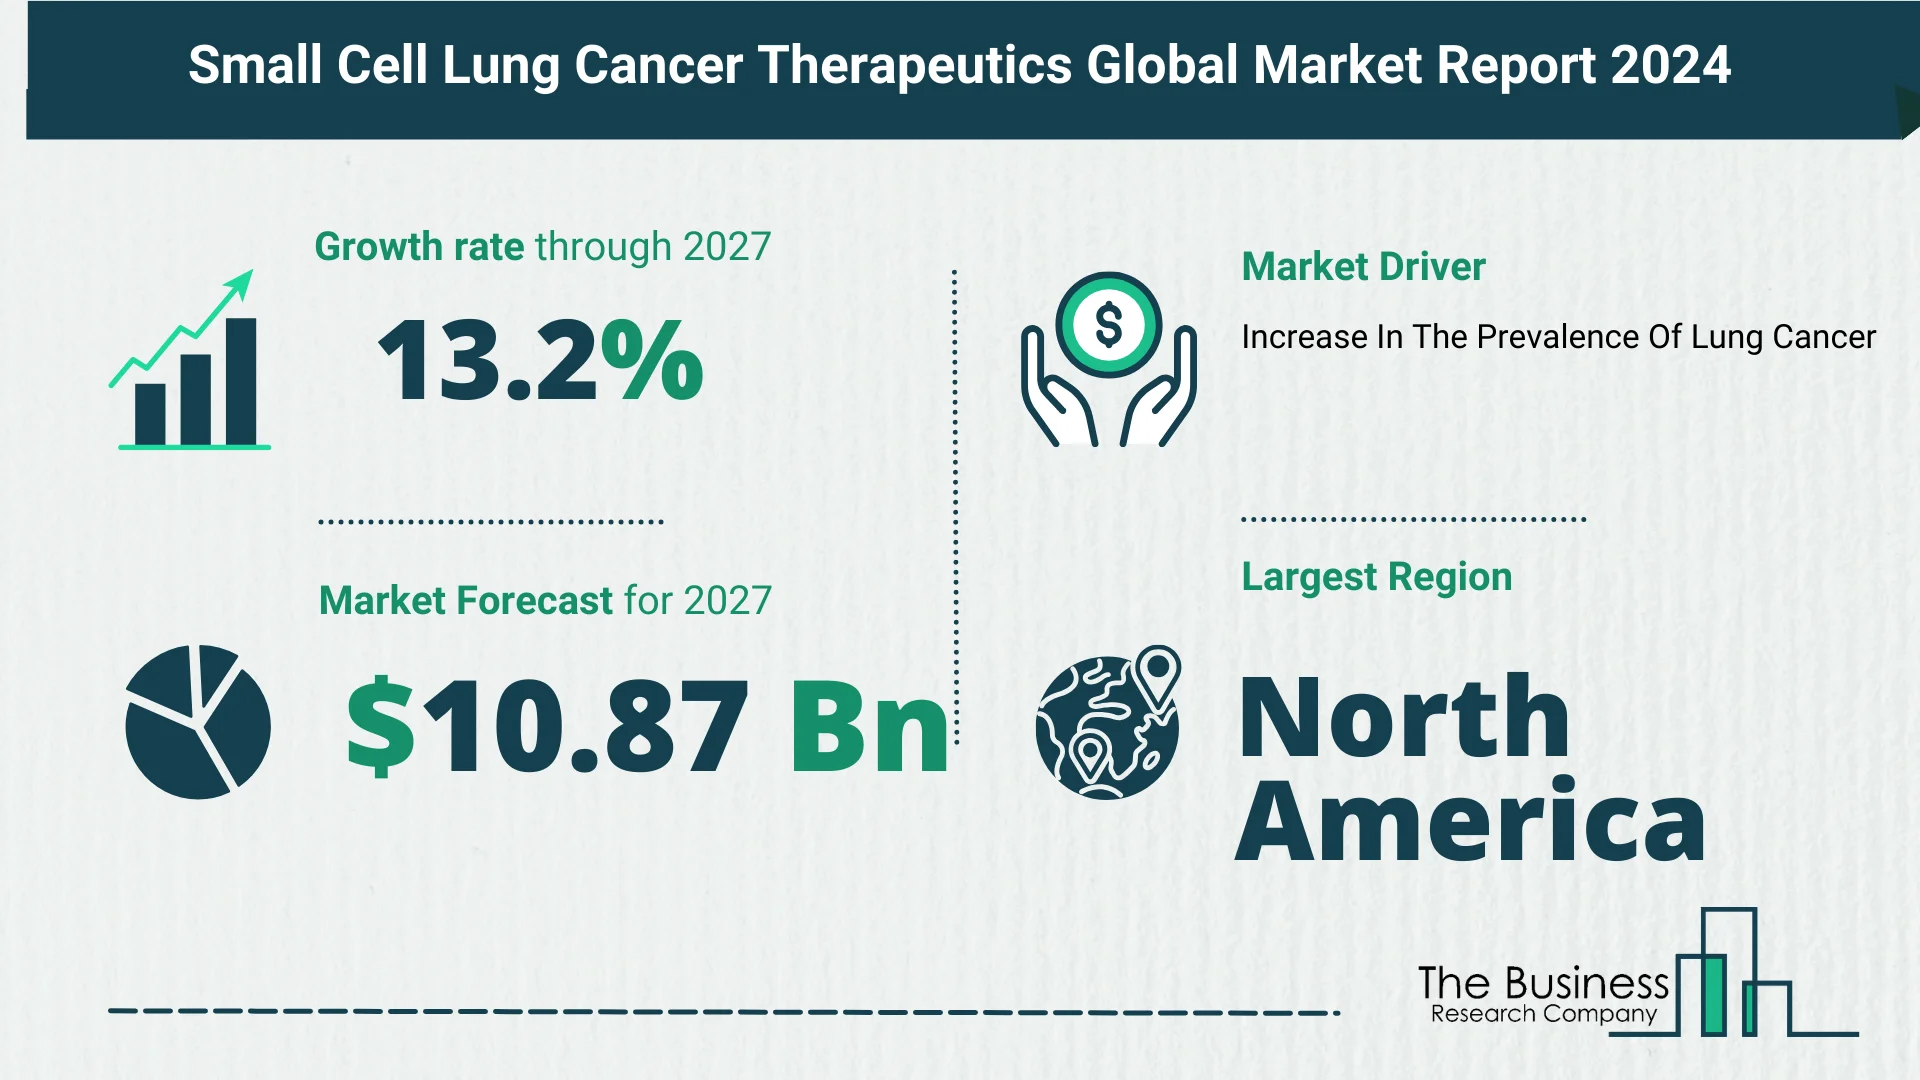 Top 5 Insights From The Small Cell Lung Cancer Therapeutics Market Report 2024